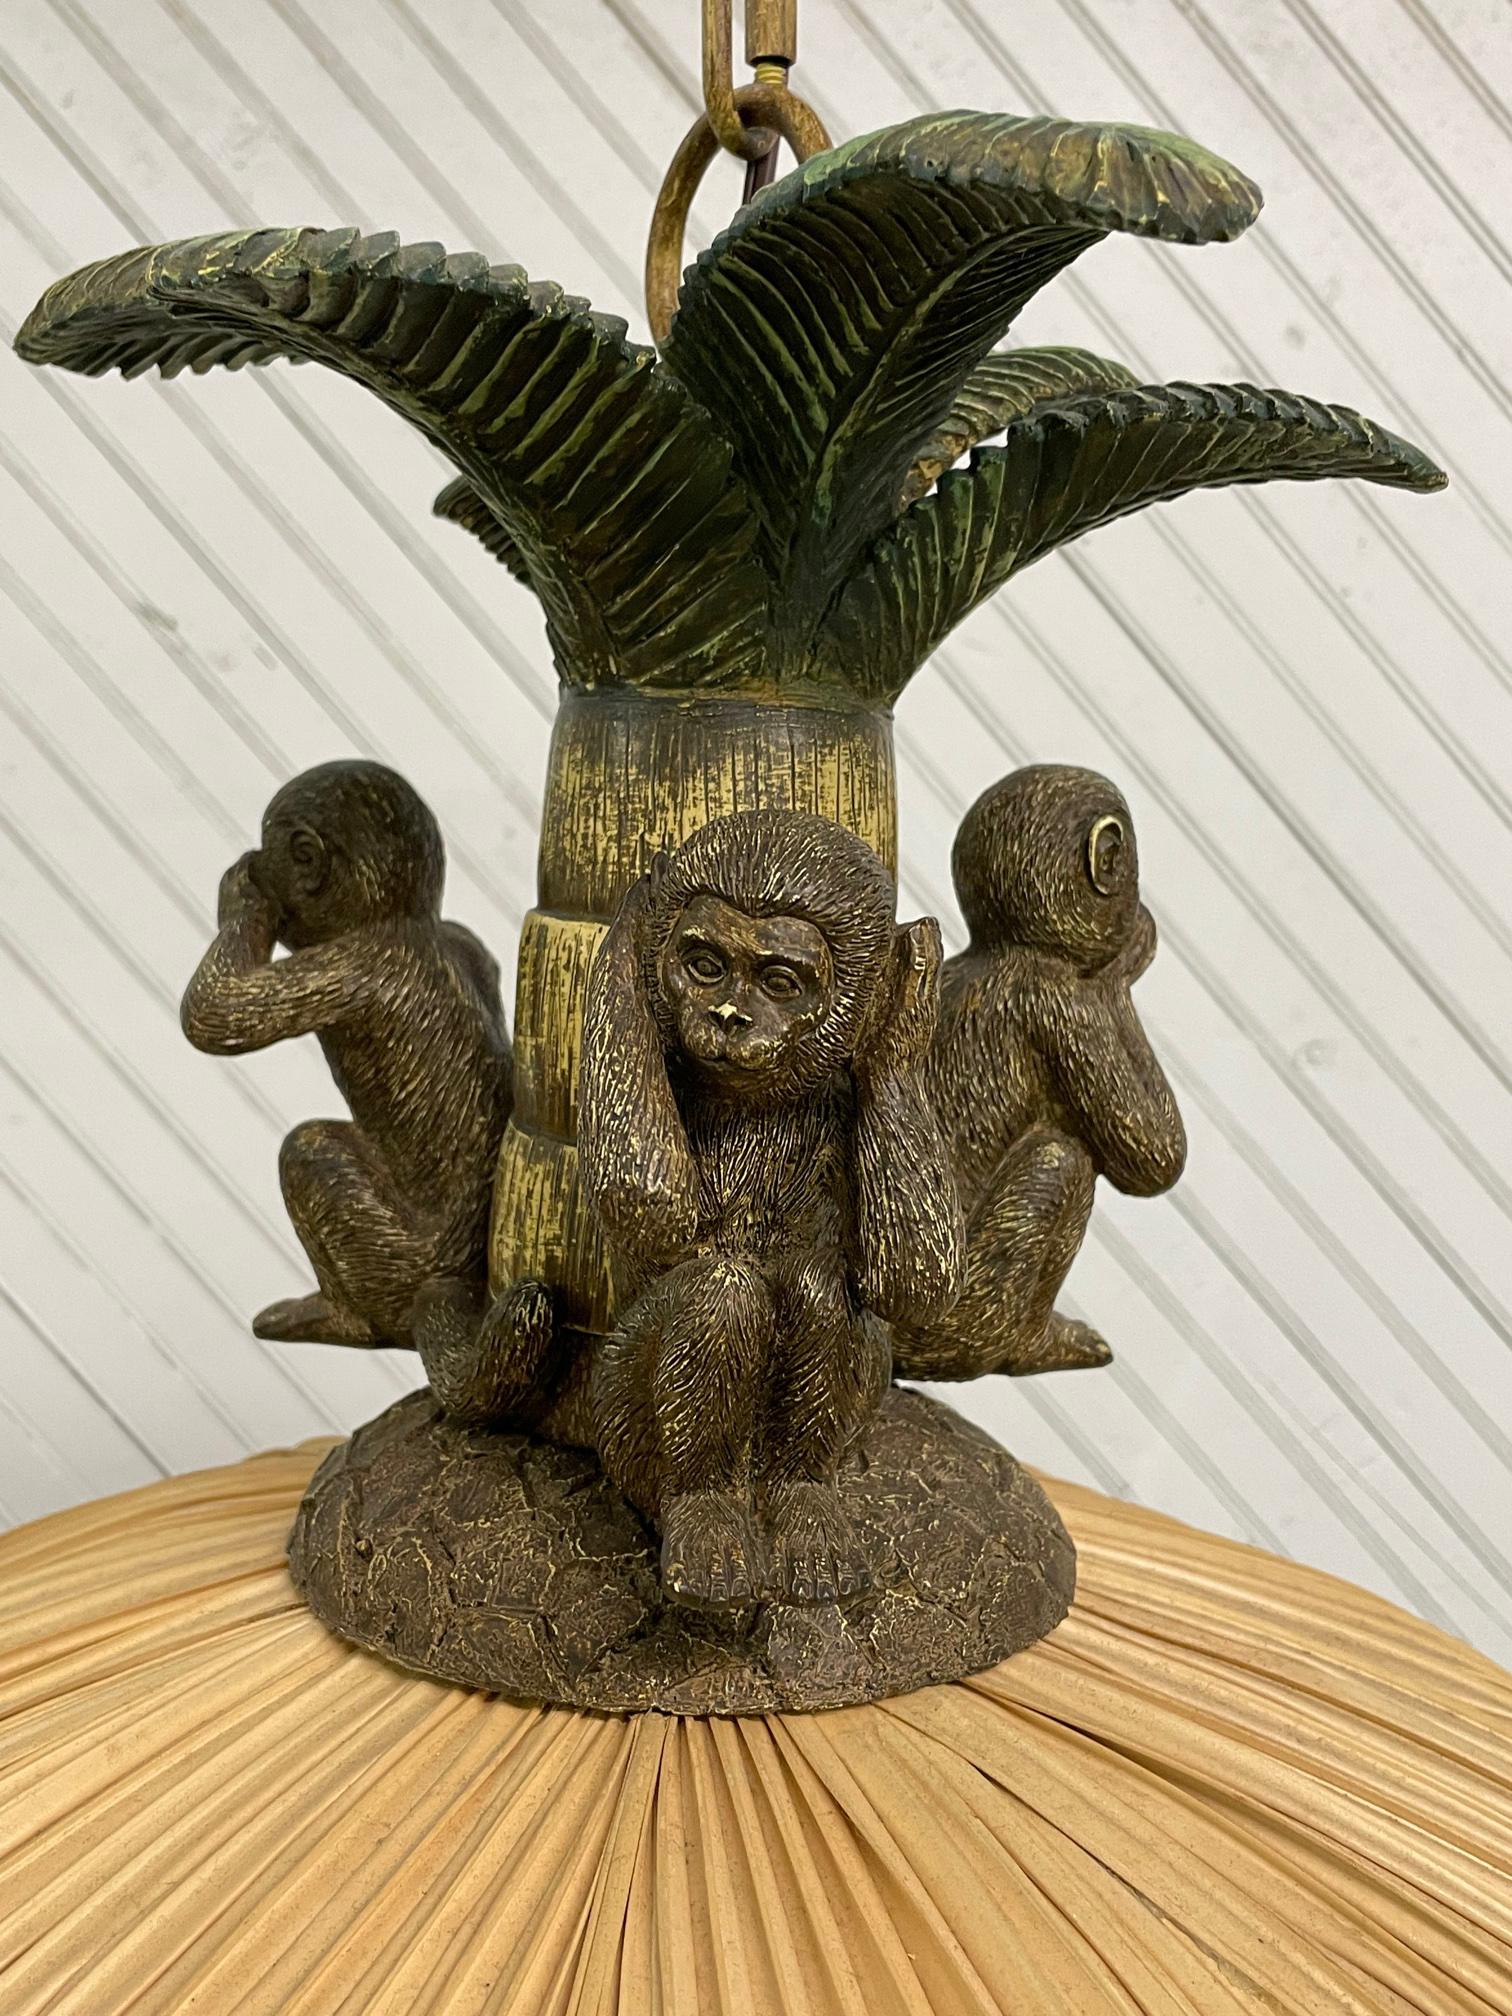 Tropical style hanging lamp features the three famous monkeys signifying hear no evil, speak no evil, and see no evil. Pleated paper shade and palm tree top. Good condition with minor imperfections consistent with age, see photos for condition